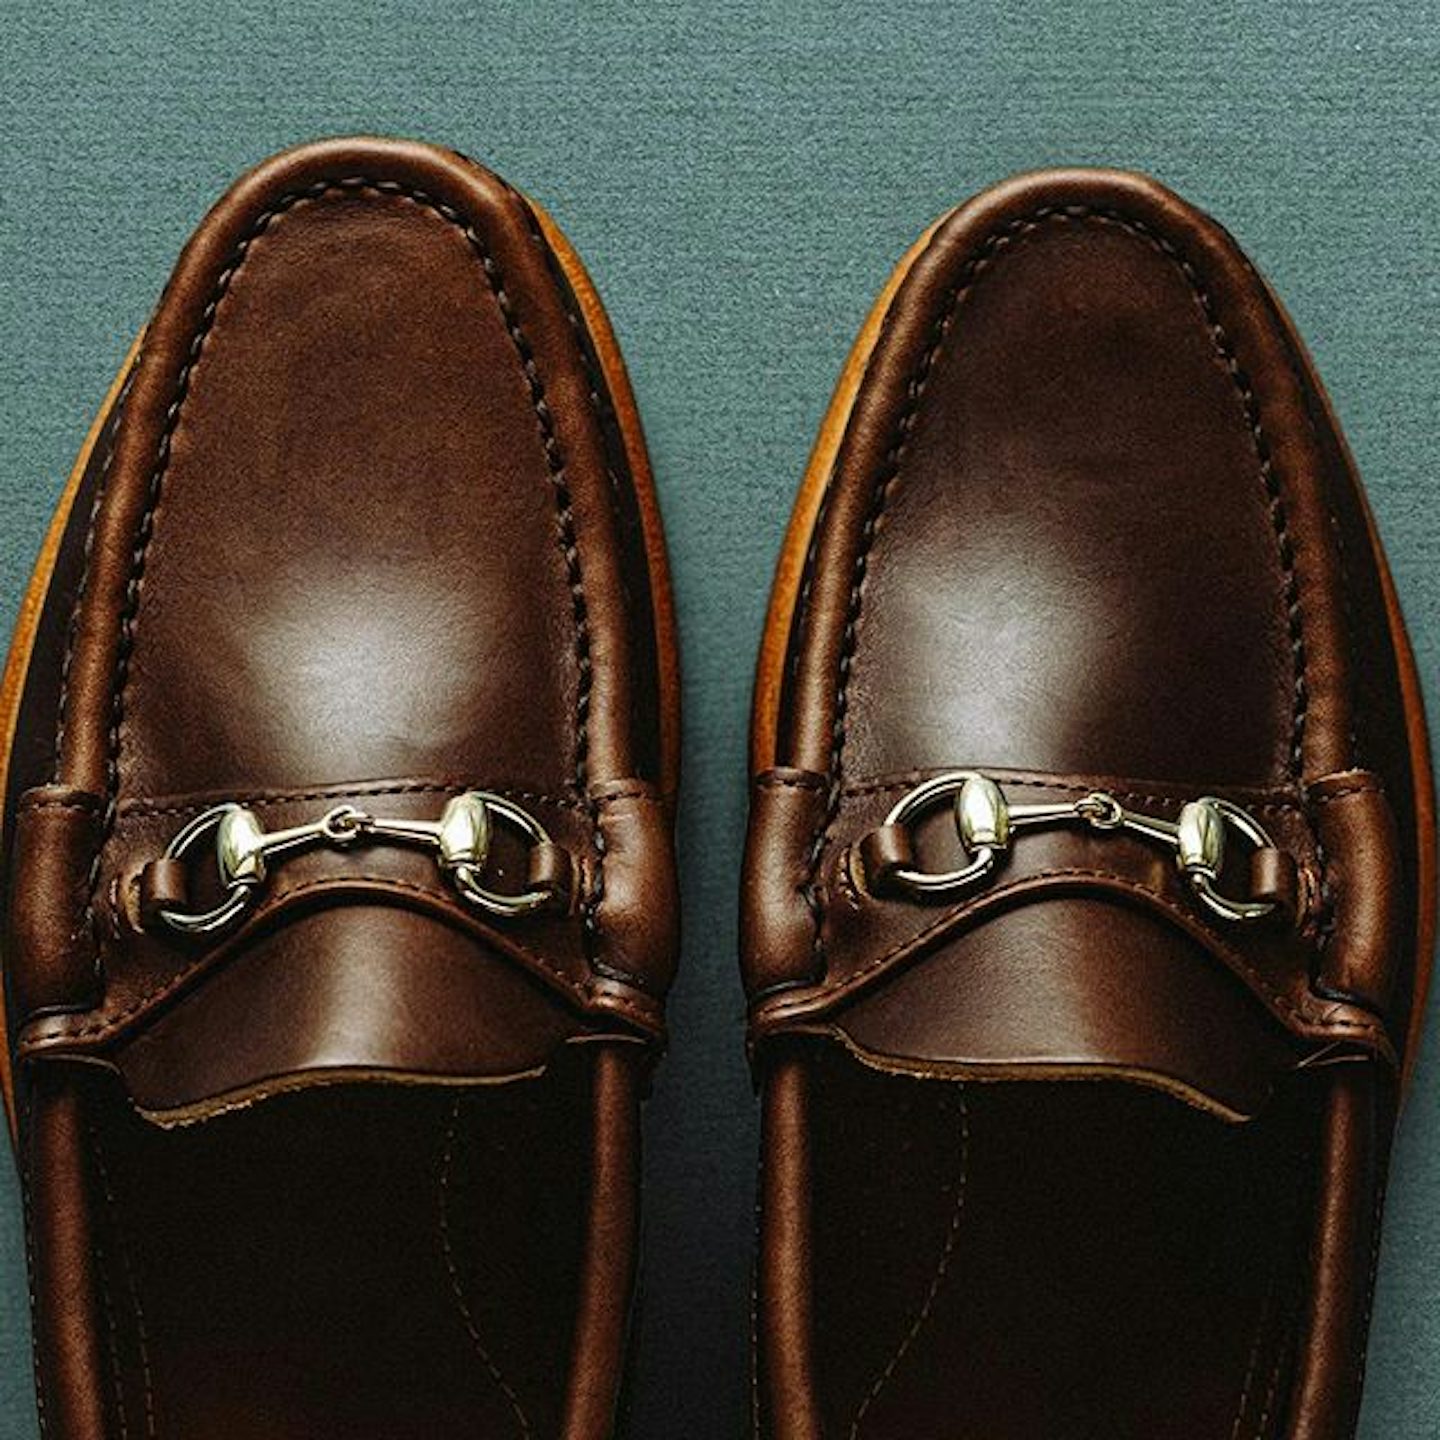 Top view of Oak Street Bootmakers Bit Loafer in Brown Chromexcel